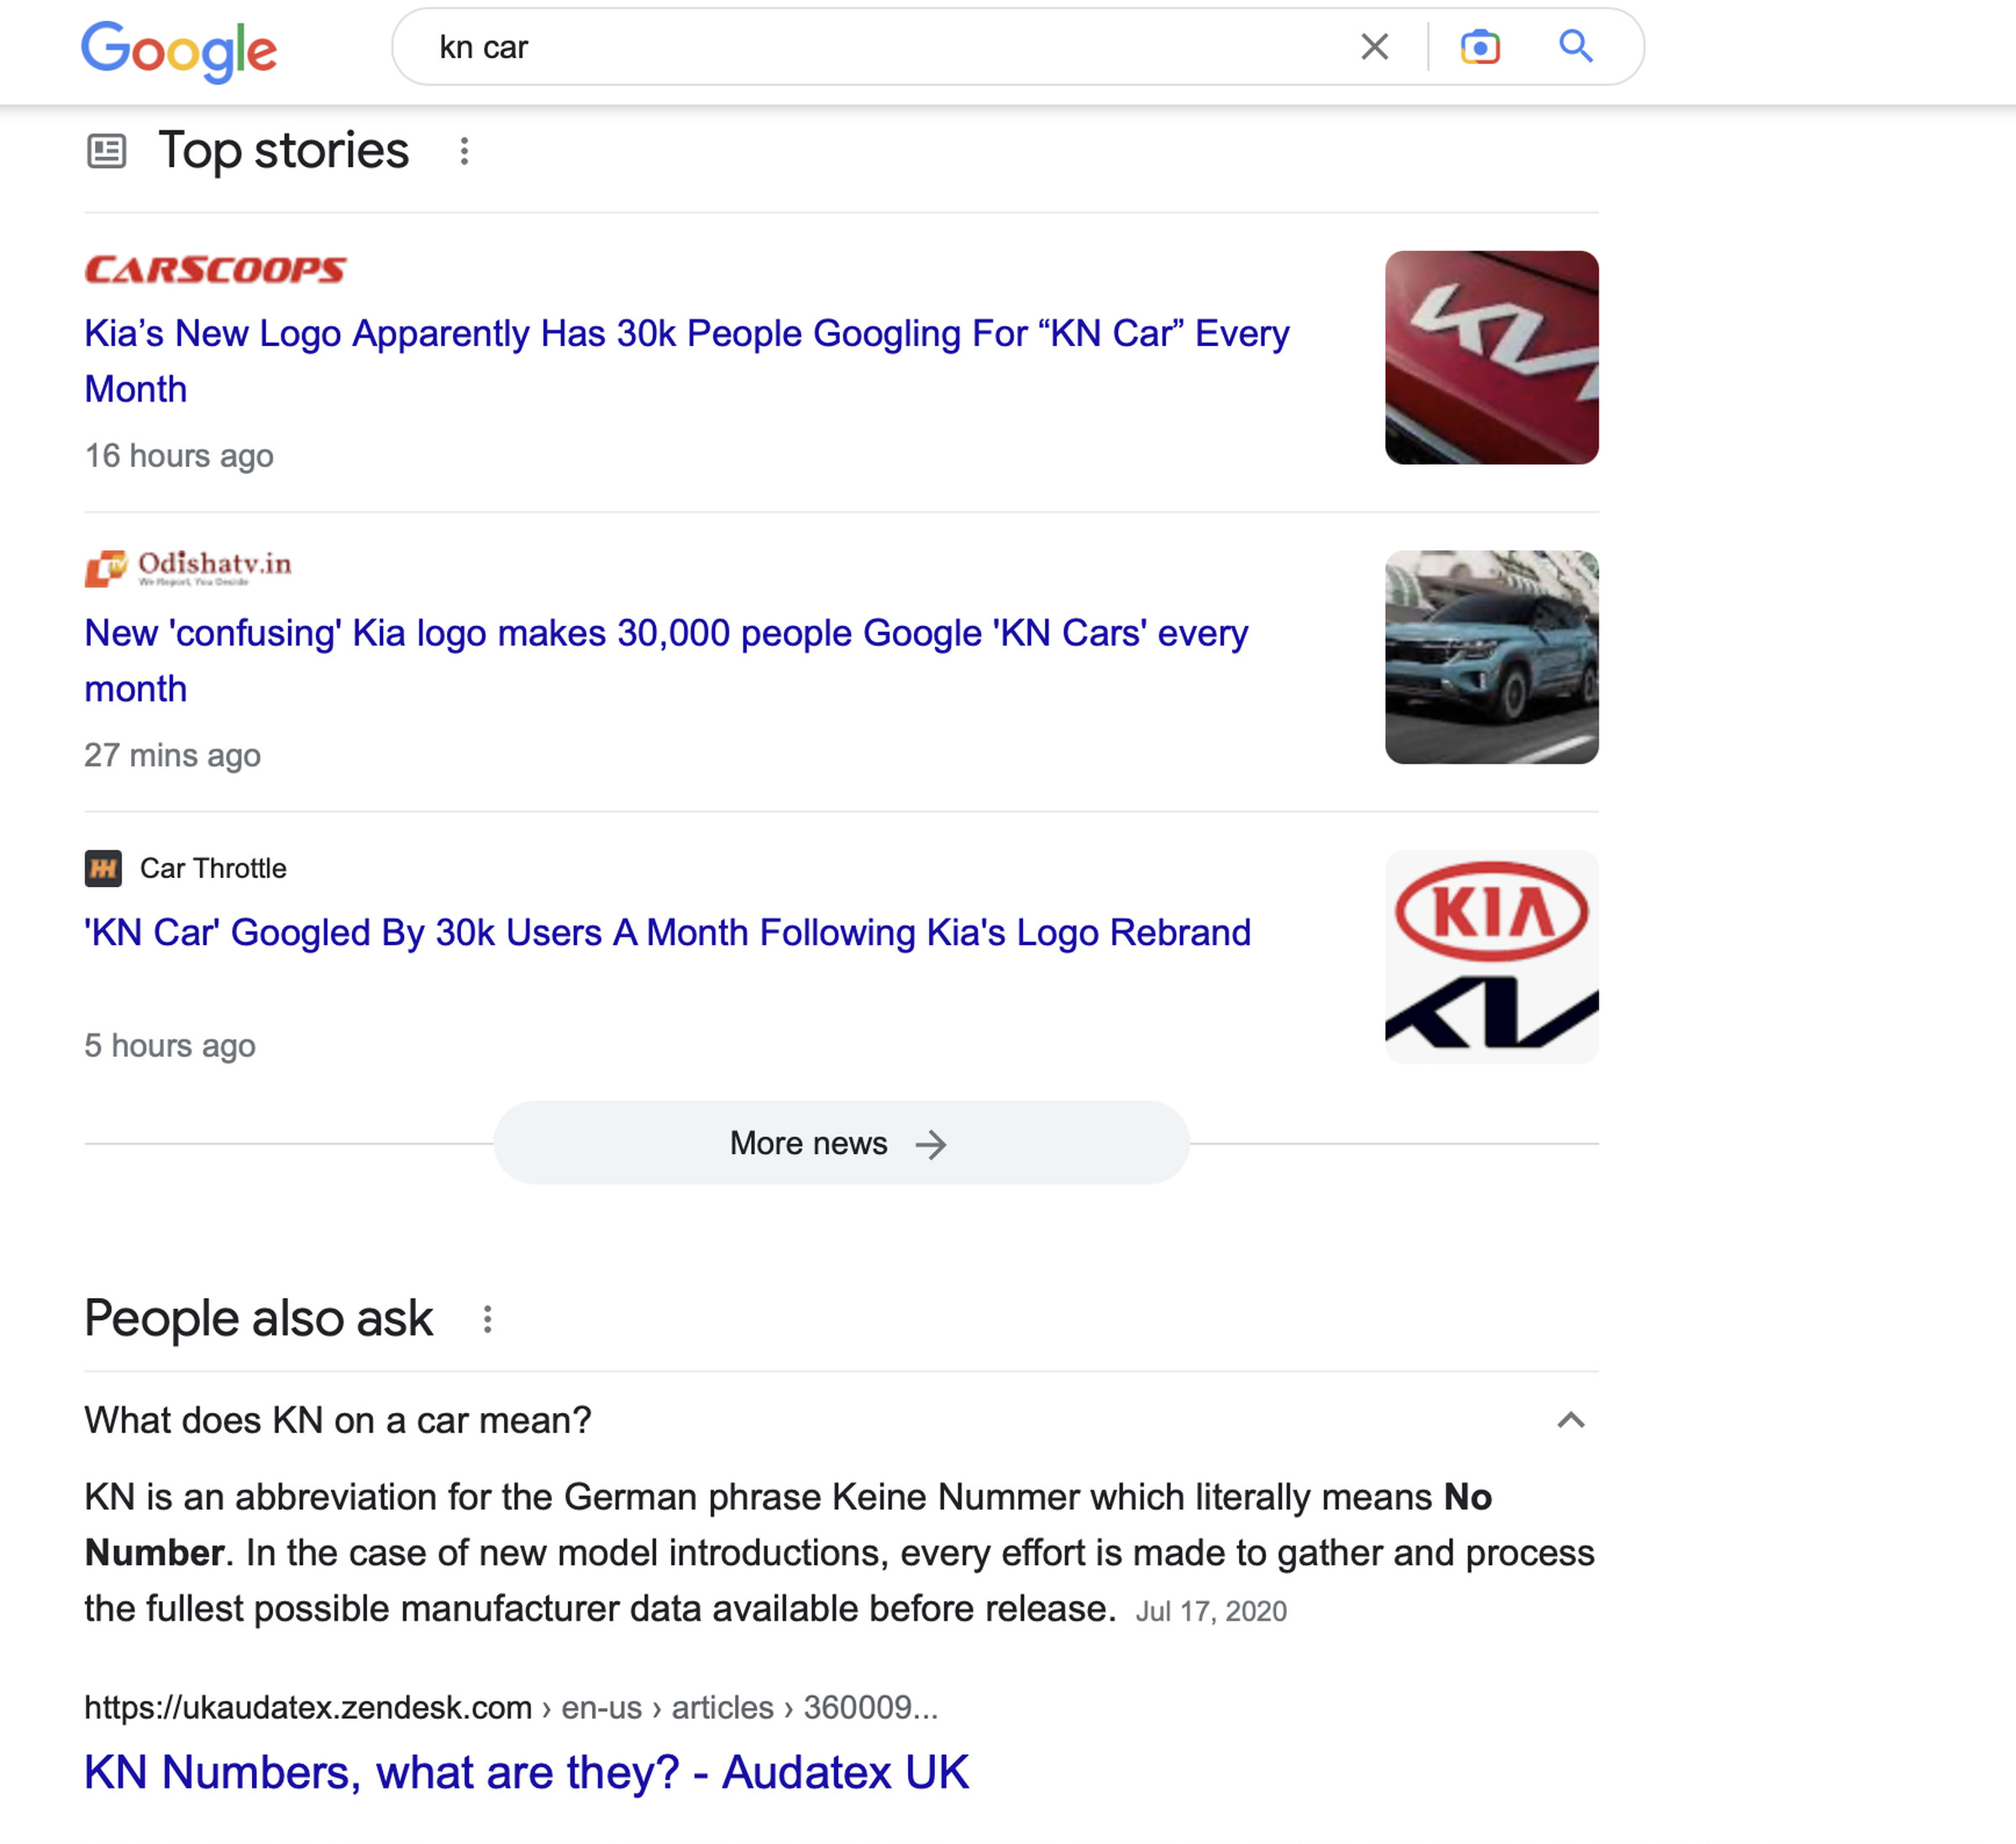 A screenshot of the top Google search results for KN car, showing three news items and an answer to 